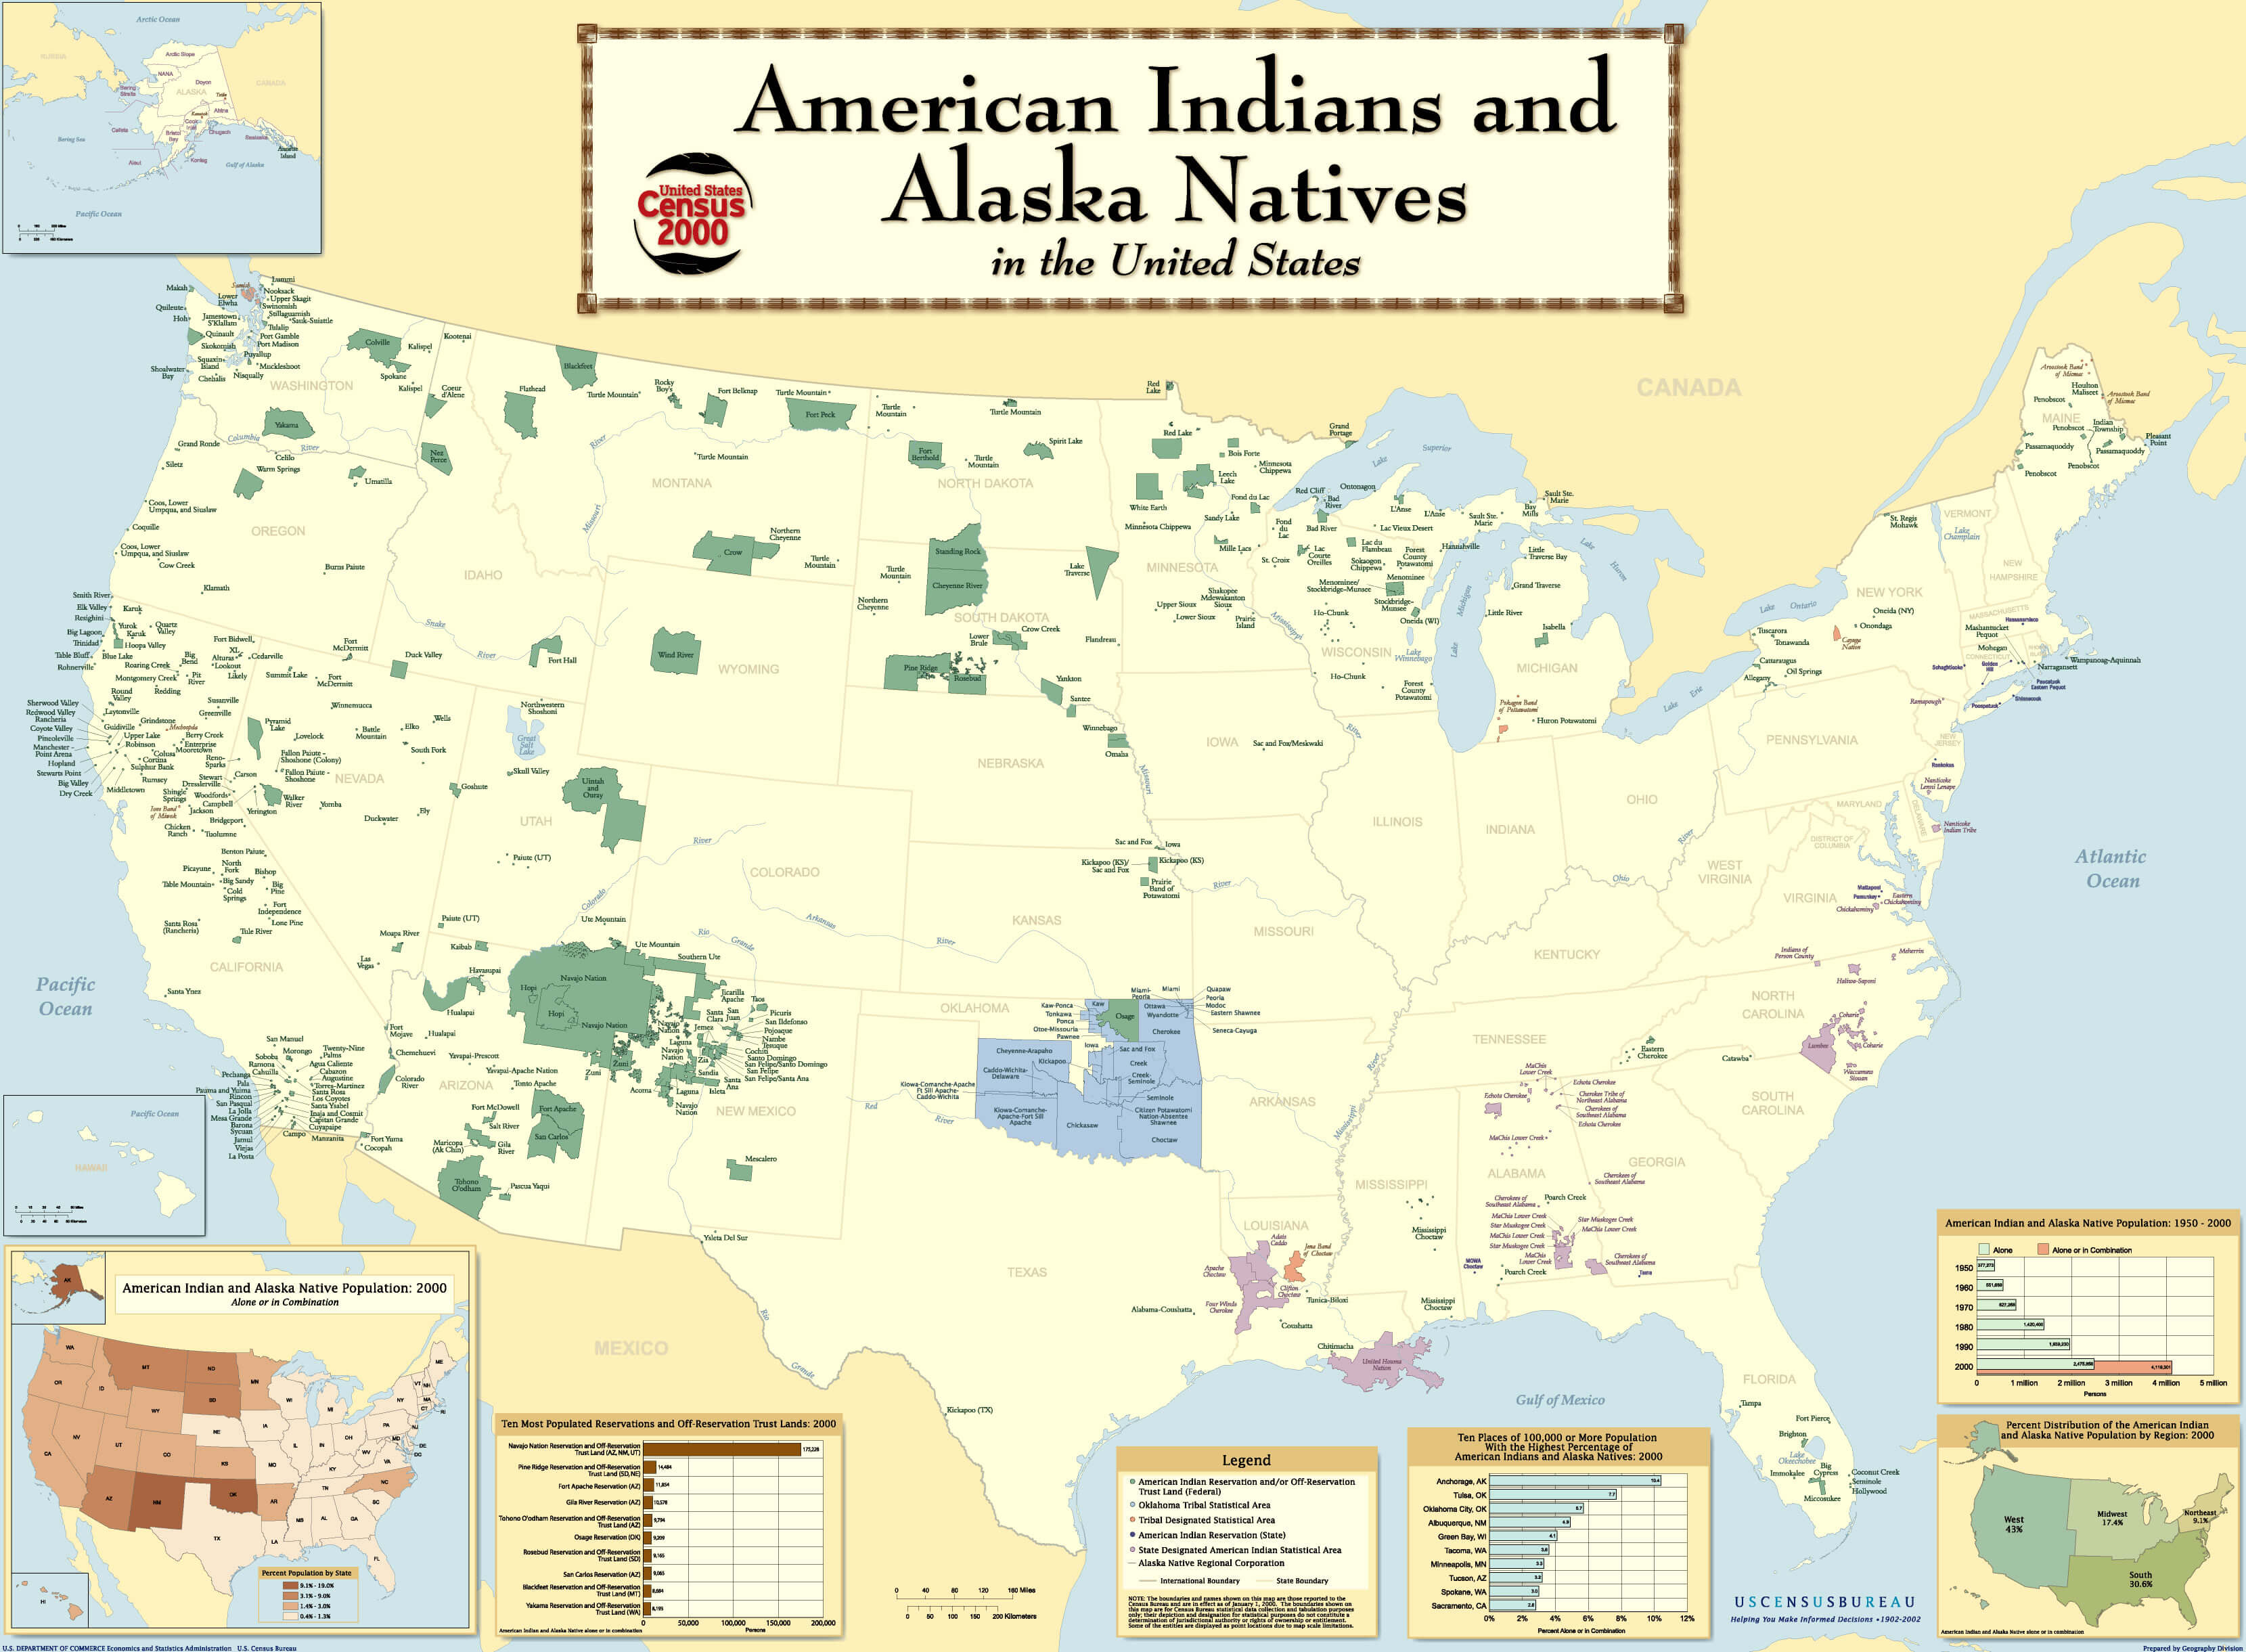 Indian Tribes In Usa Map